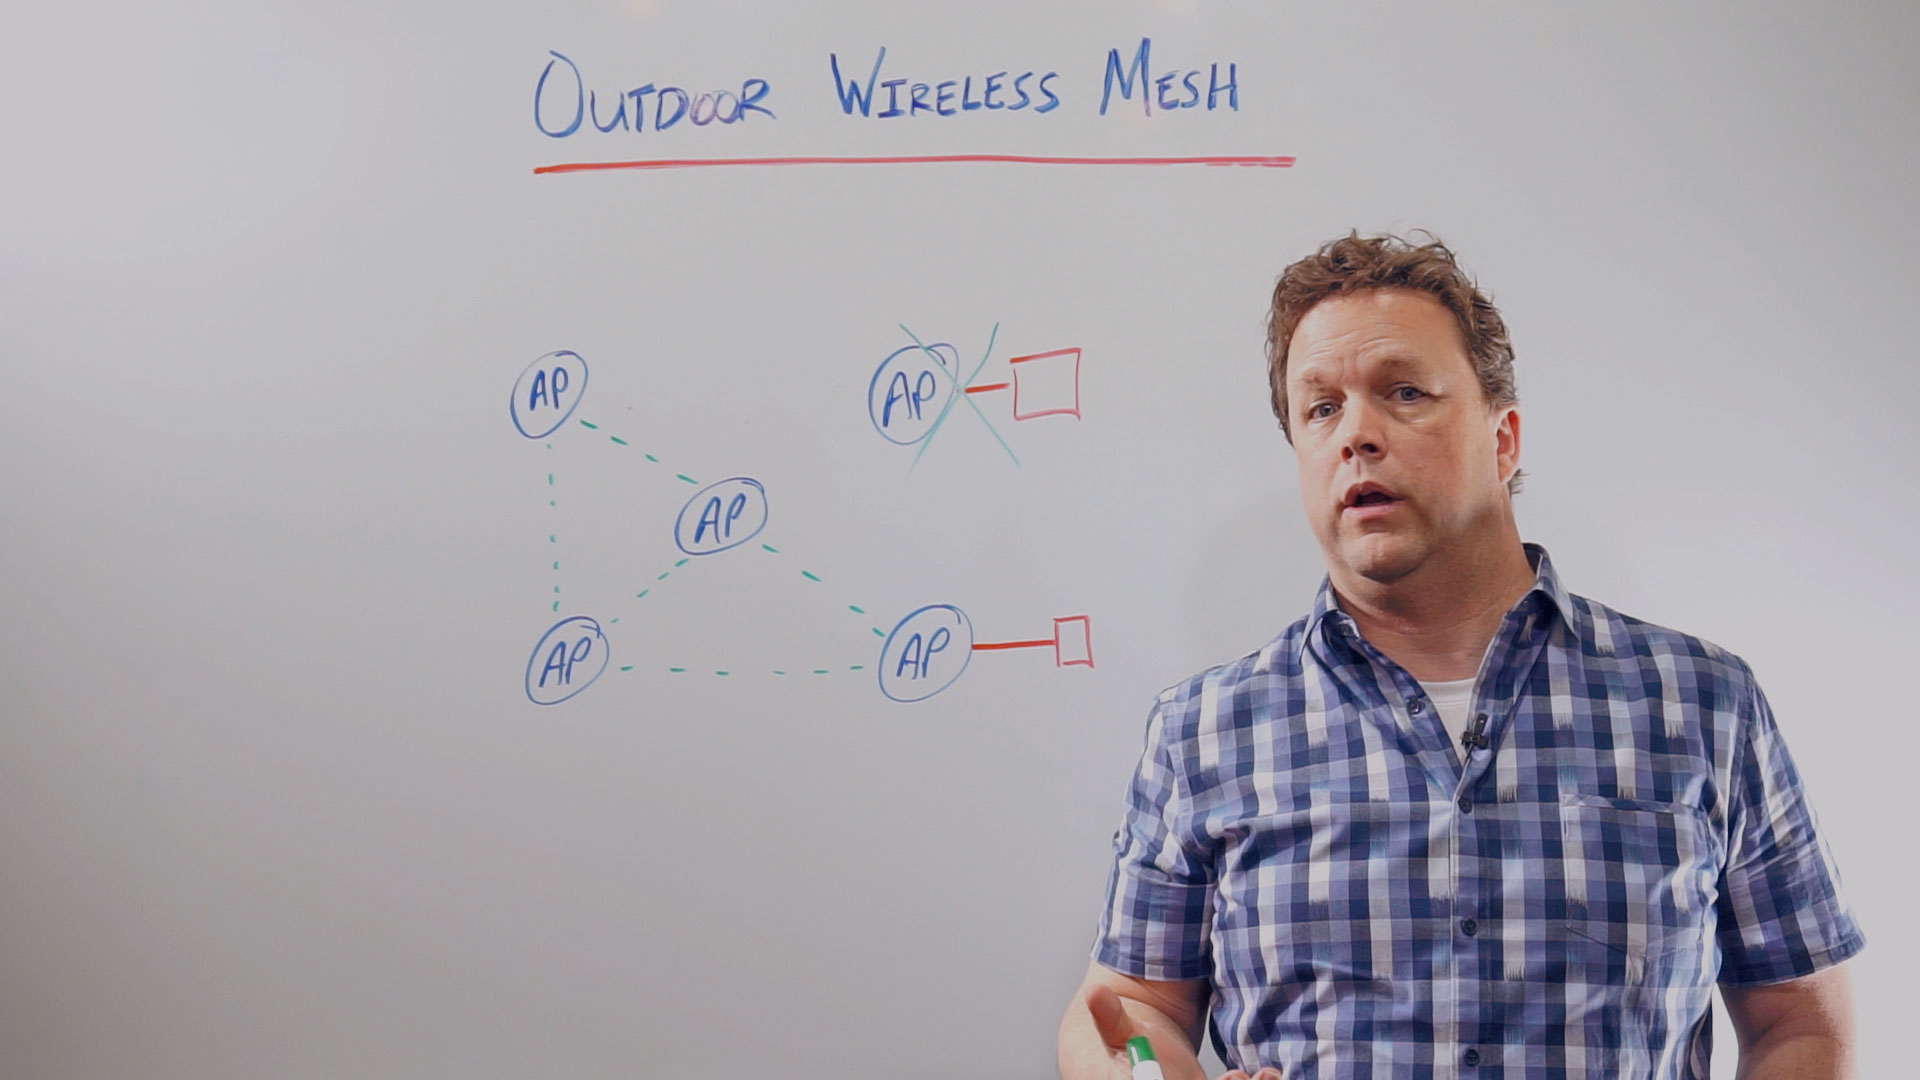 Outdoor Wireless Mesh Networks: What are They, and When Should They Be Used? [Whiteboard Wednesday]